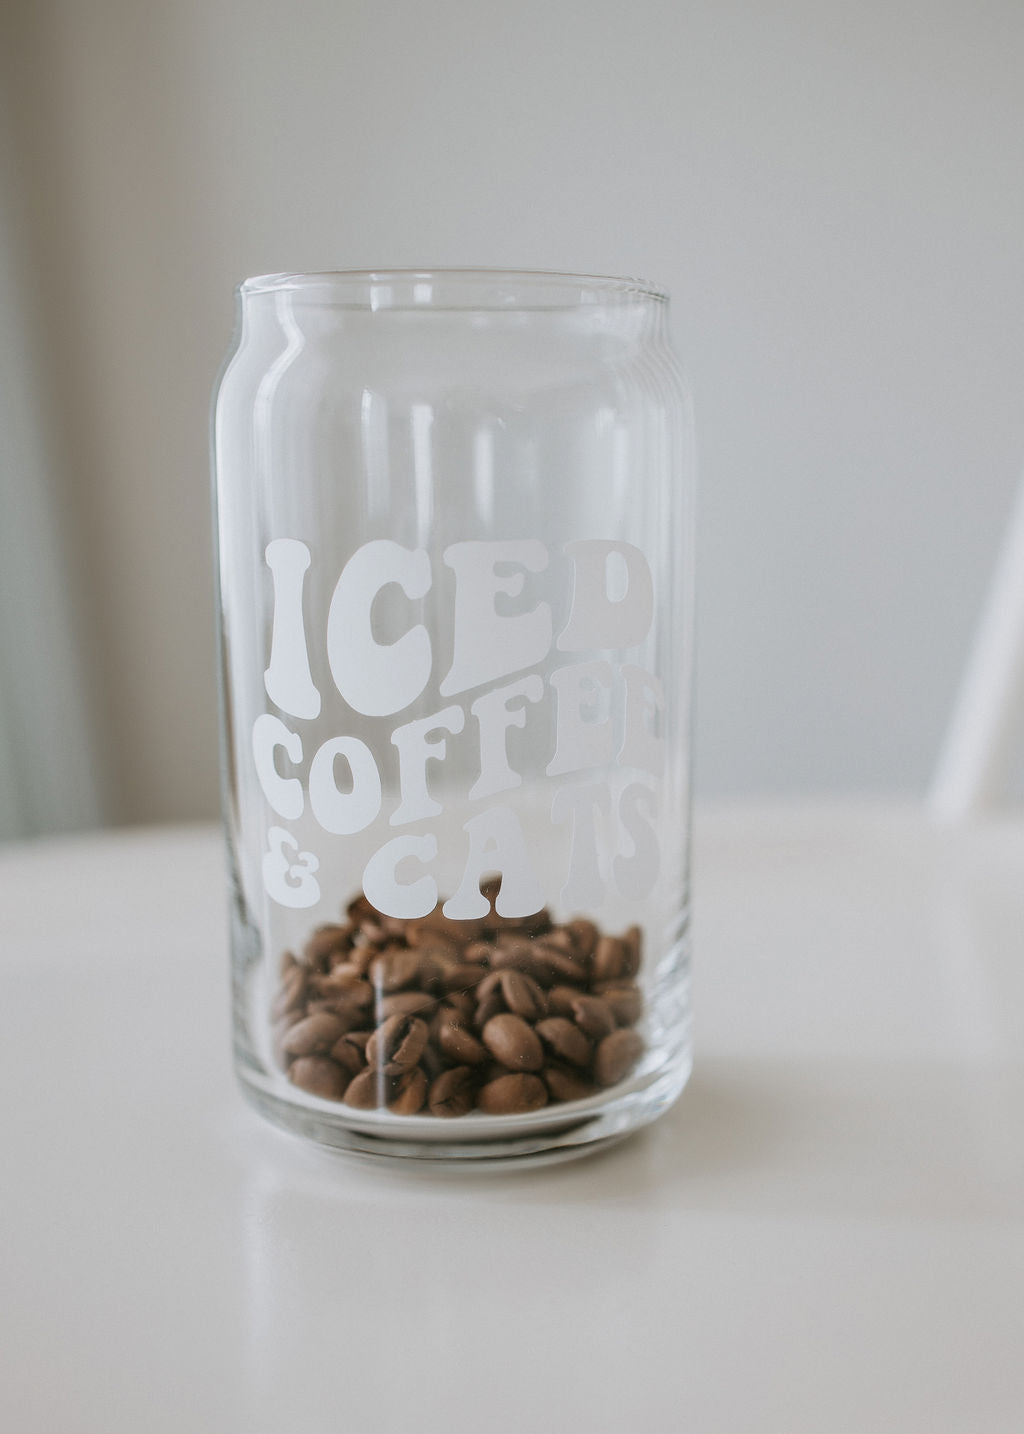 Iced Coffee and Cats Glass Can